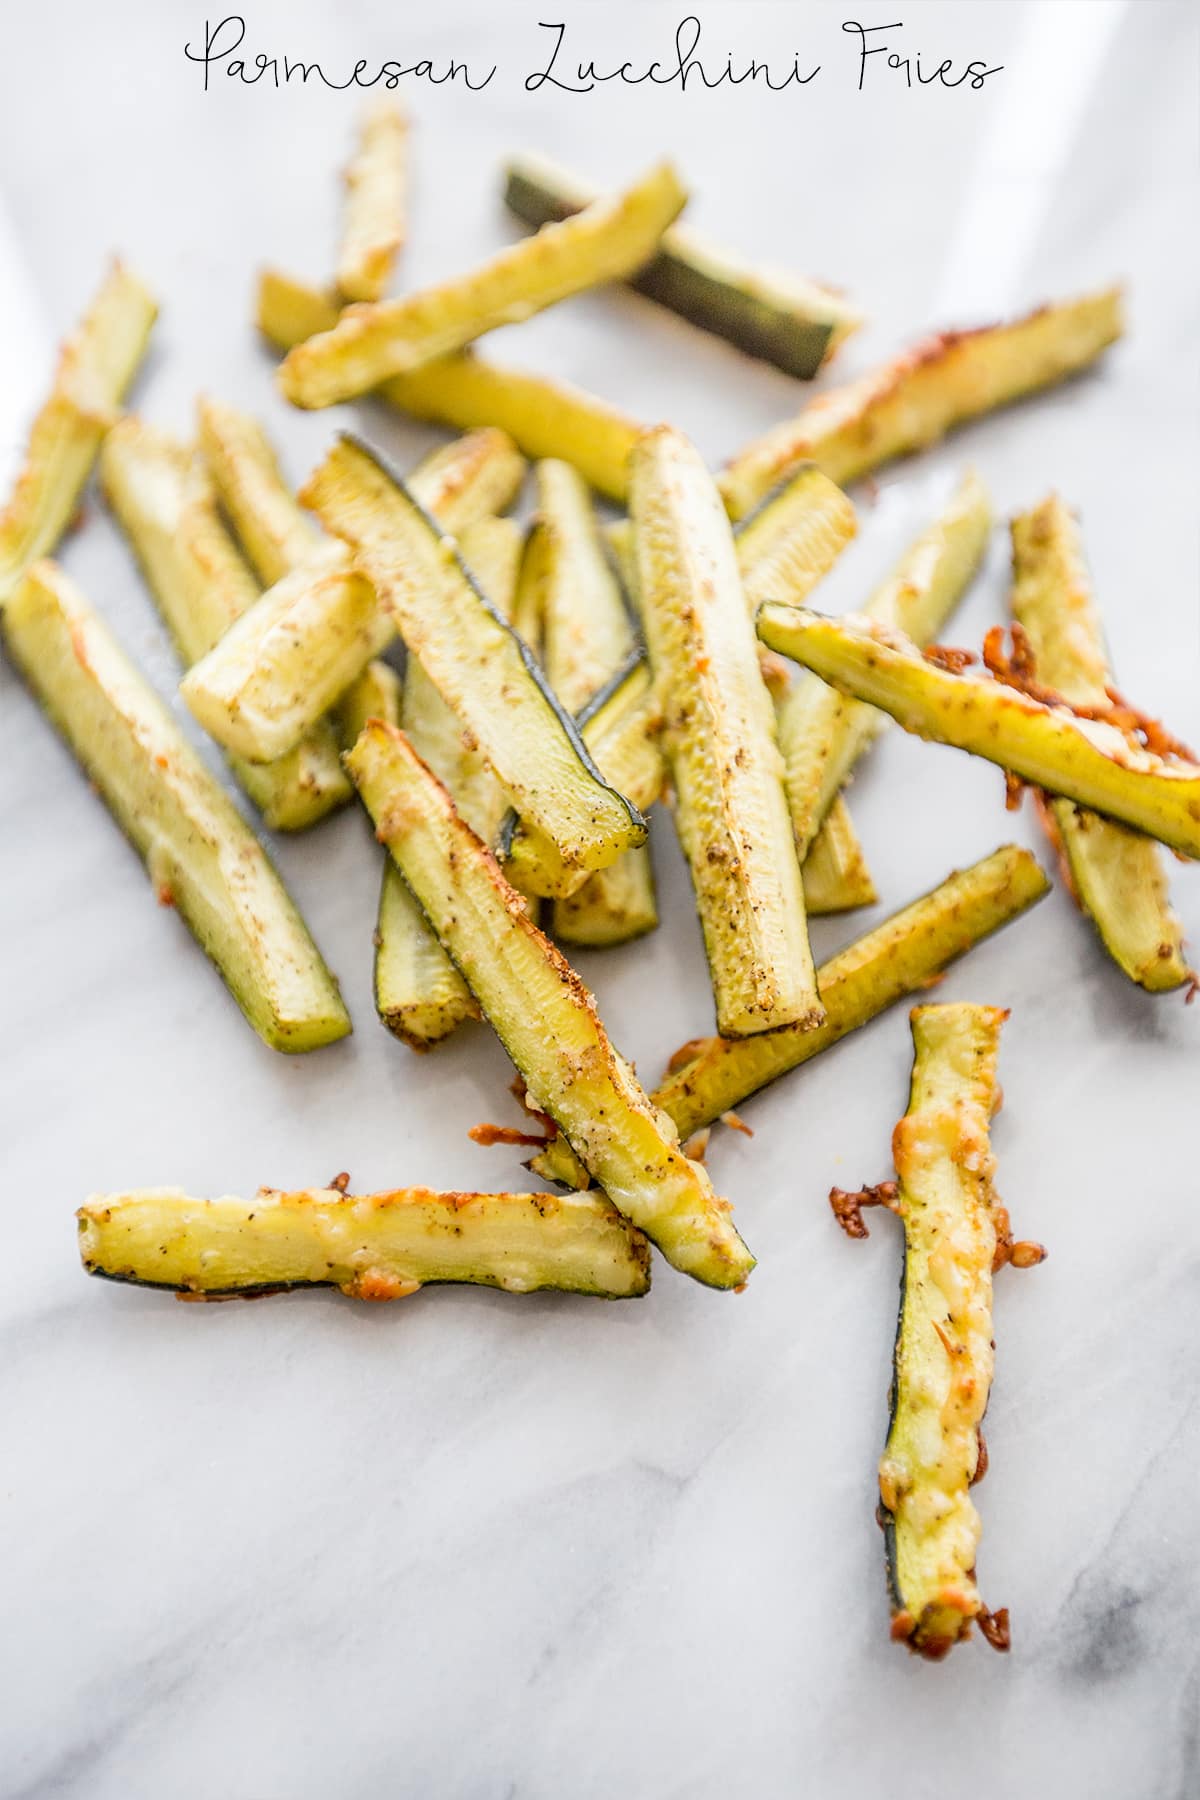 Parmesan Zucchini Fries- so delicious, and paleo friendly!